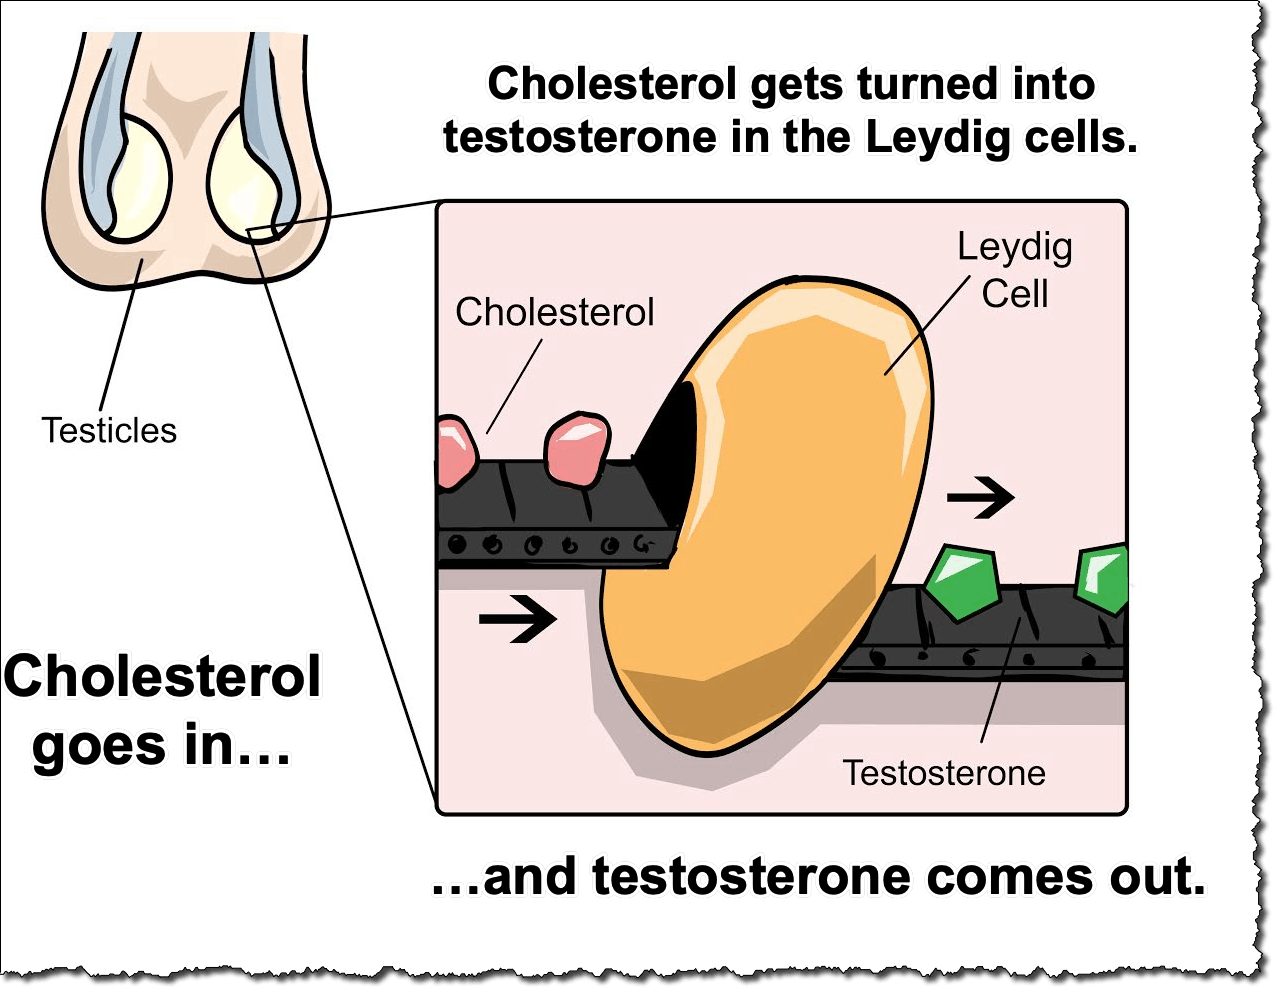 Cholesterol gets turned into testosterone in the leydig cells.